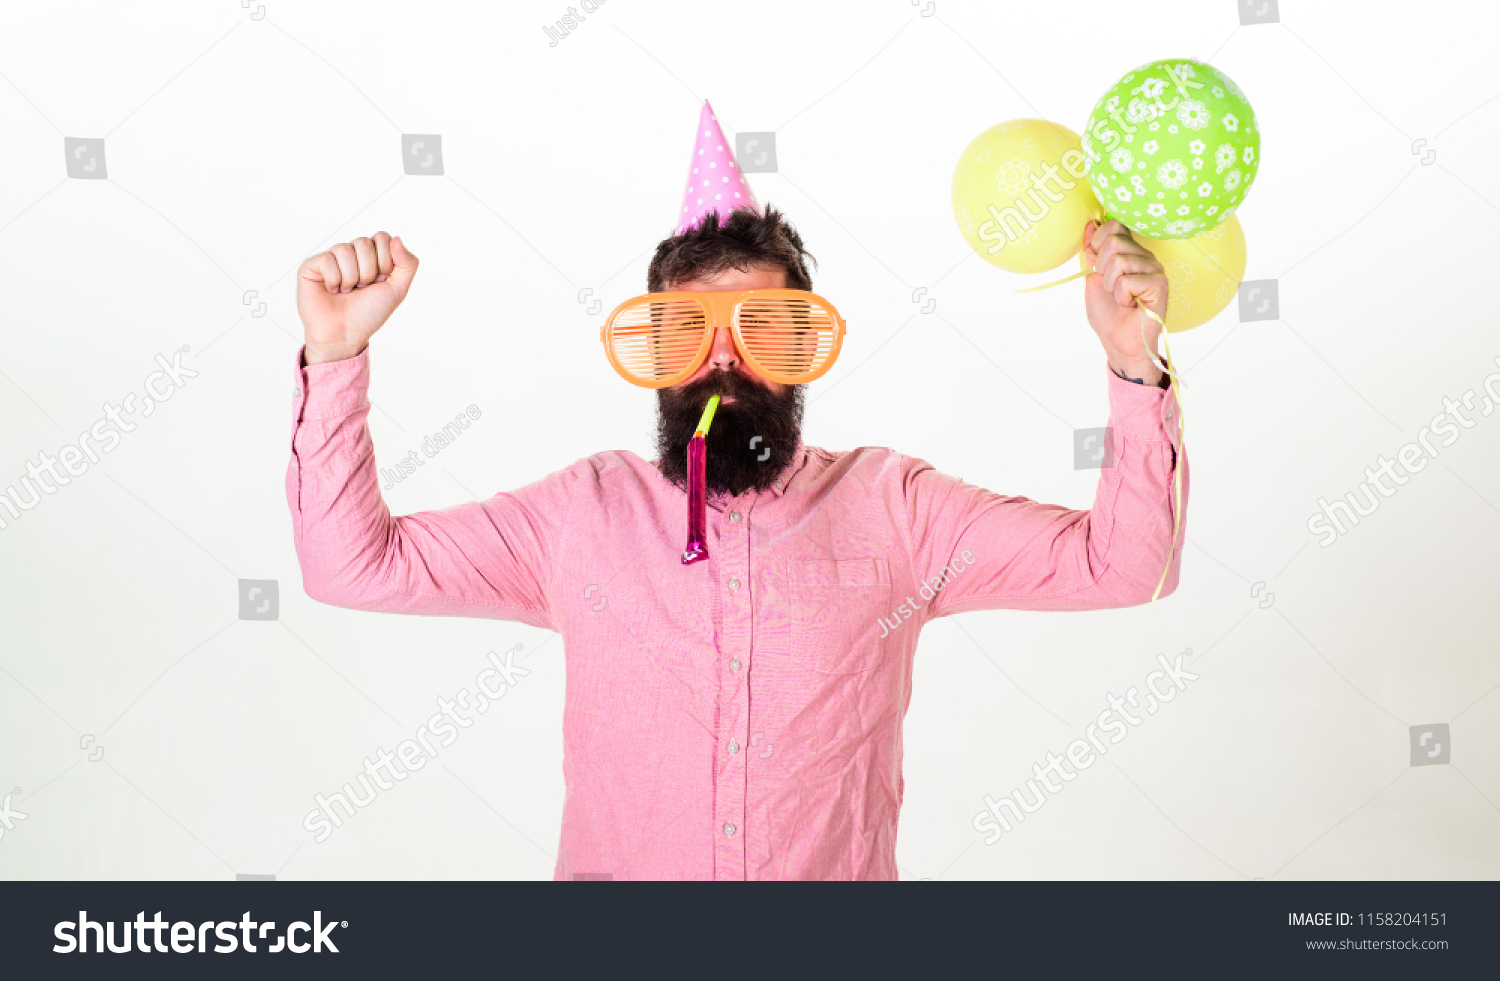 Celebration concept. Man with beard and mustache on busy face blows into party horn, white background. Hipster in giant sunglasses celebrating birthday. Guy in party hat with air balloons celebrates. #1158204151